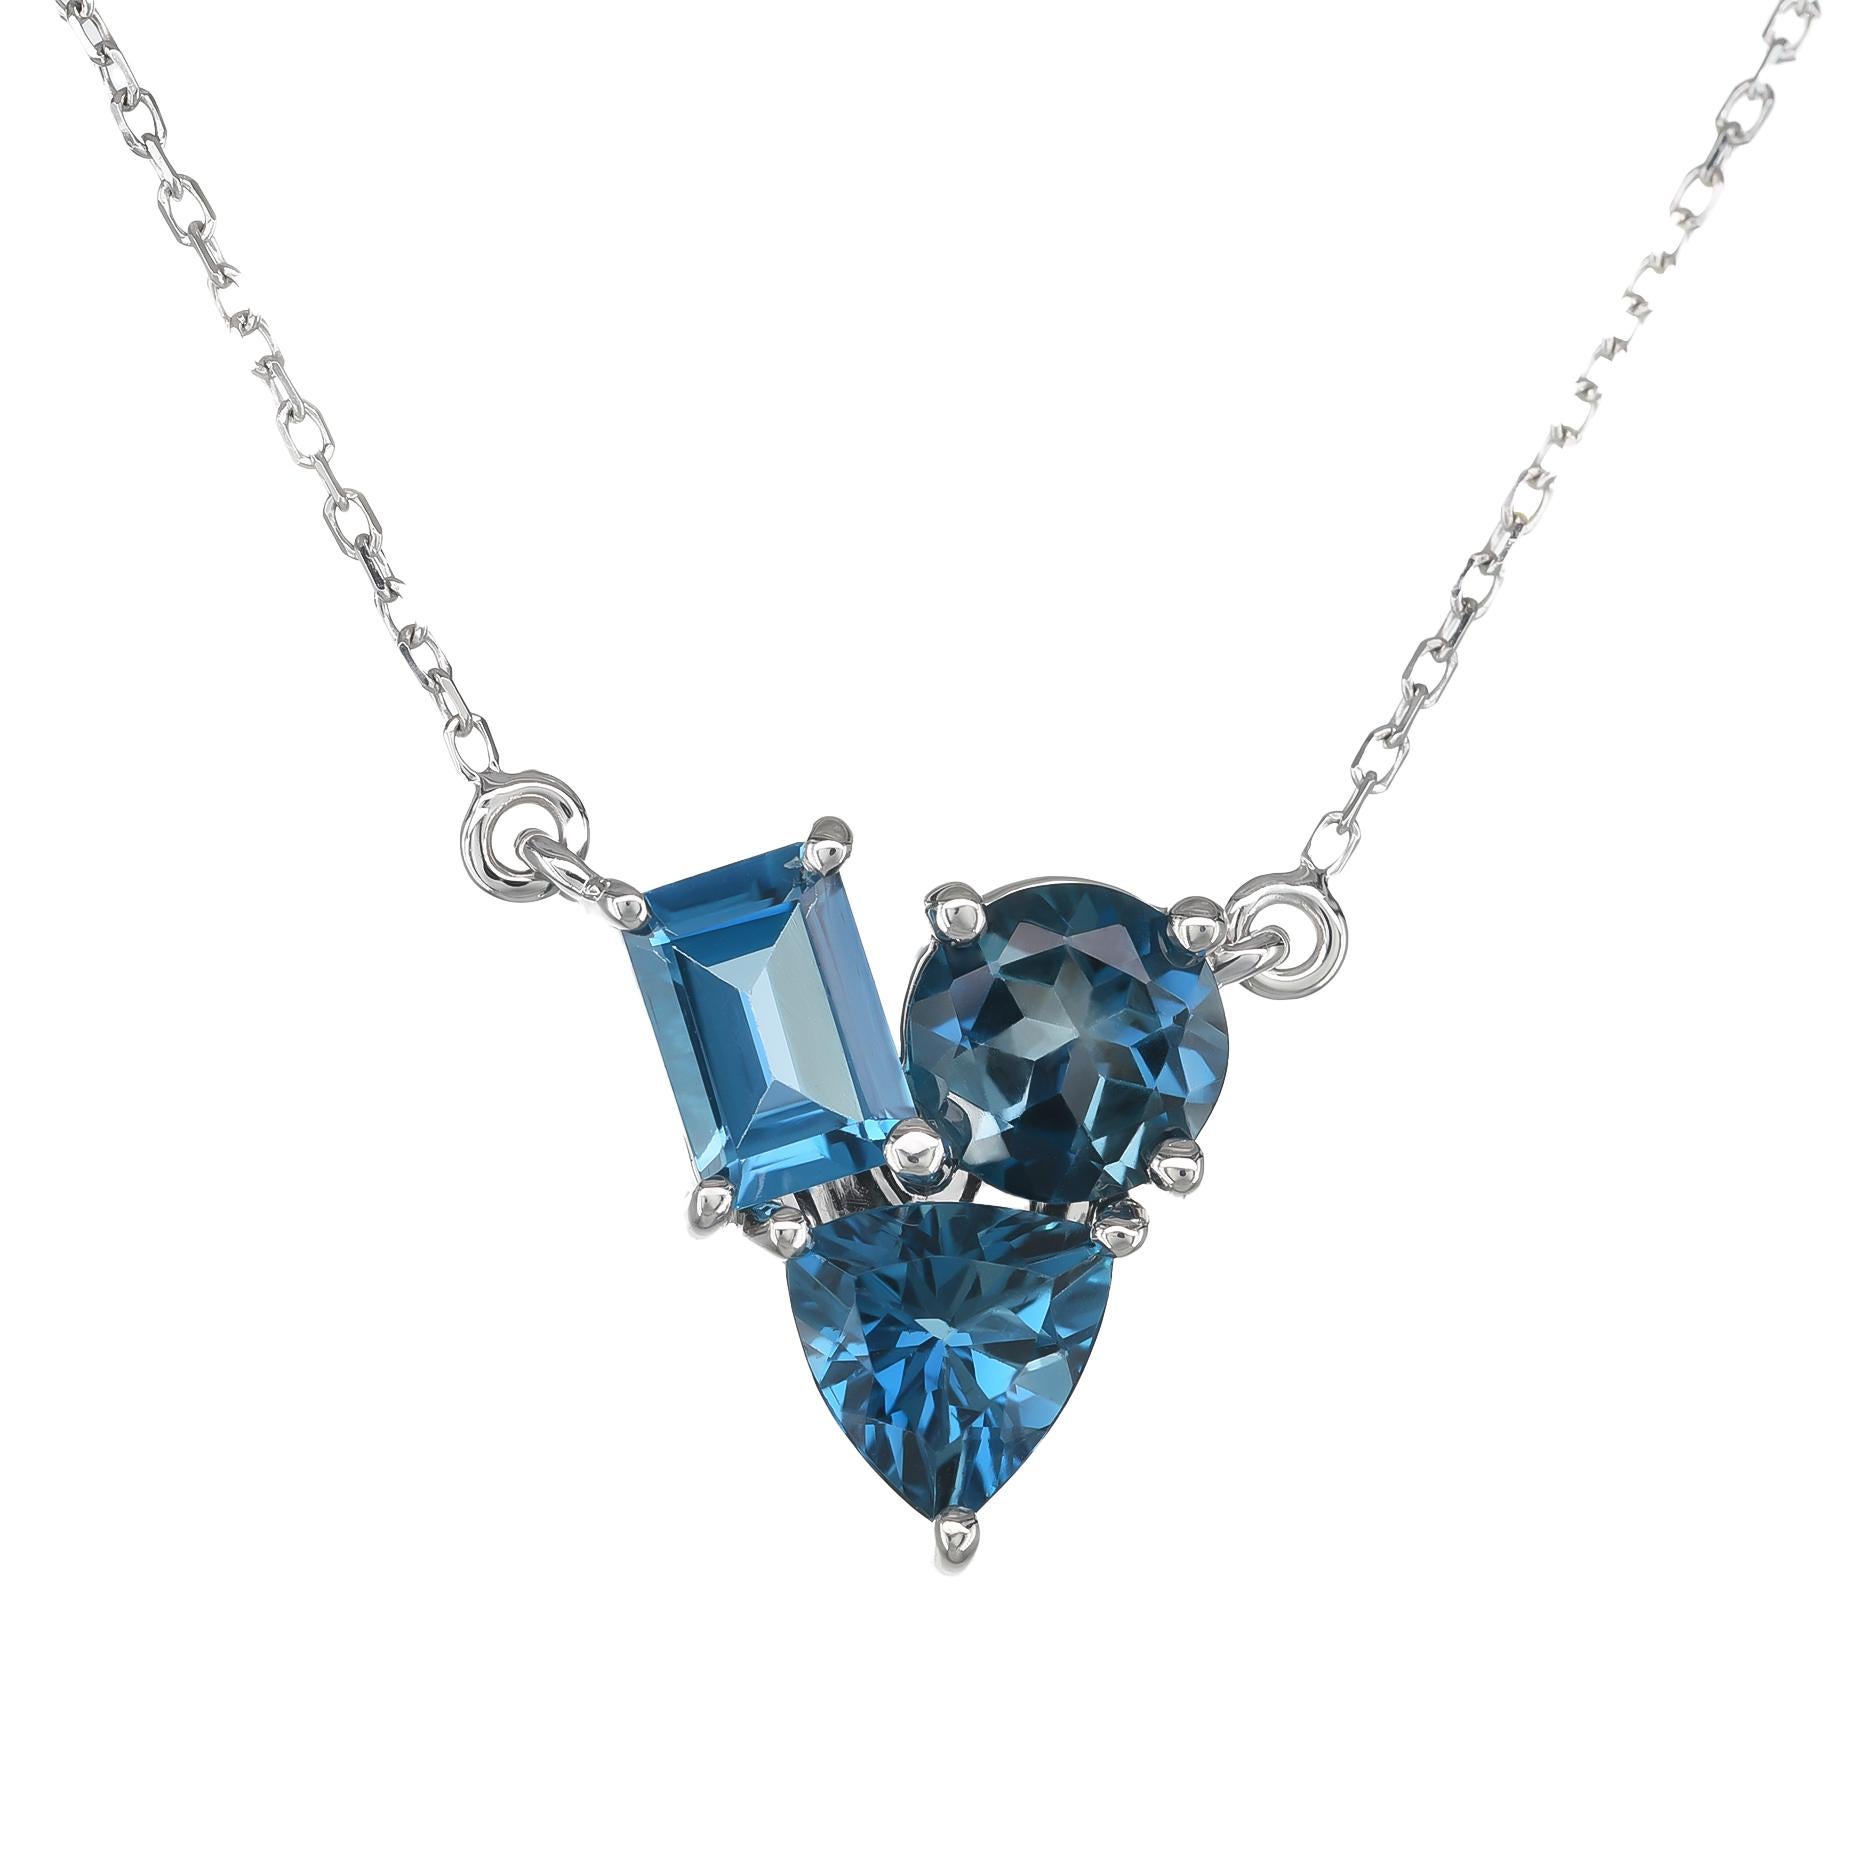 Pendant with 2.32 carats Blue Topaz set in 14K White Gold In New Condition For Sale In Los Angeles, CA